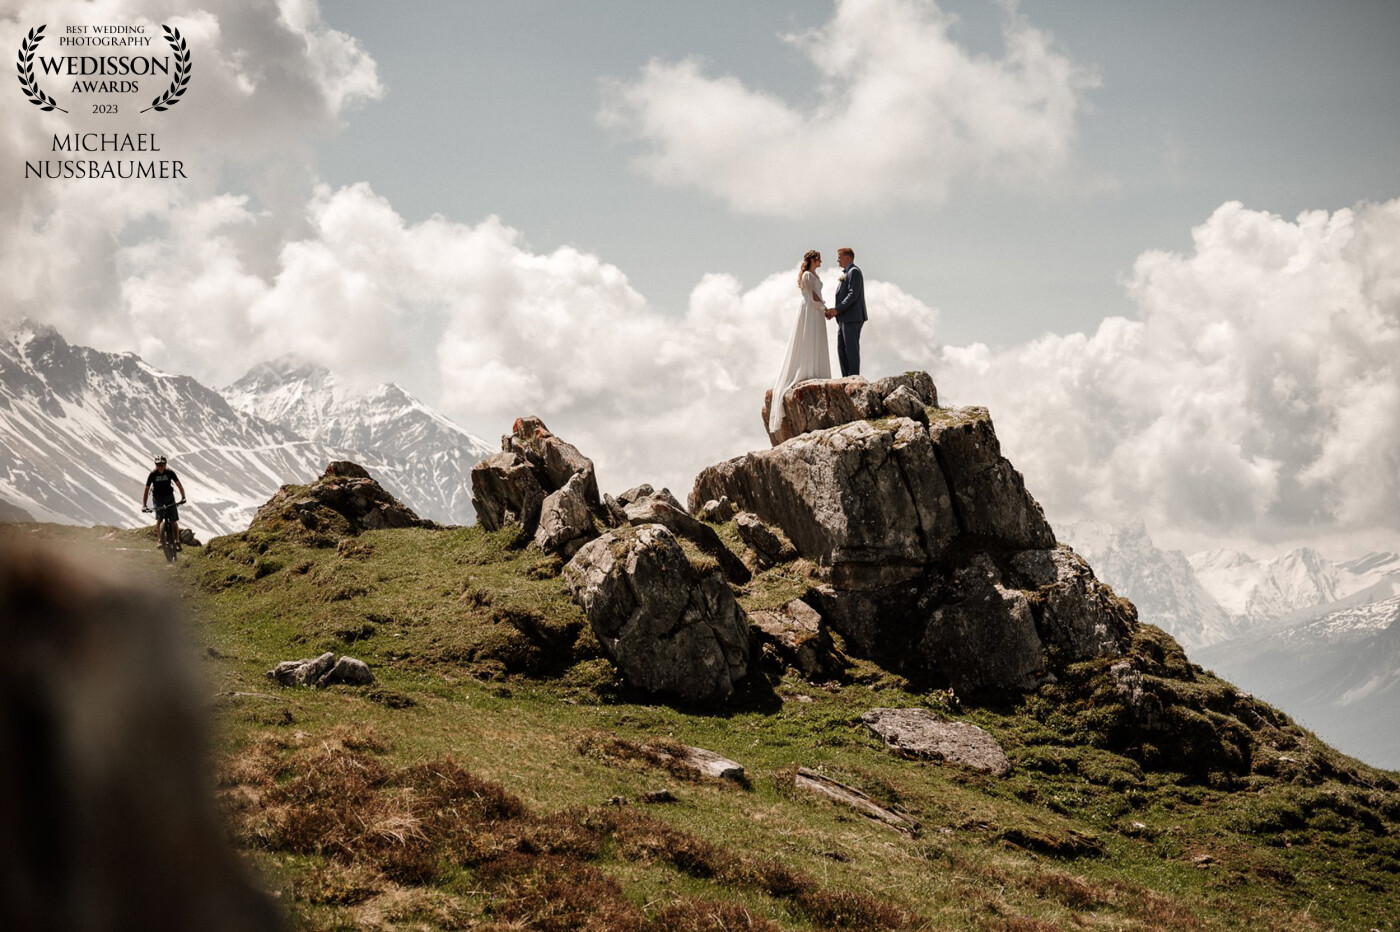 Sarah and Armando love the mountains. Just around the corner from where they live, on a beautiful cloudy day, we found this epic spot. After the first look, we took a few photos on this rock where cyclists crossed the path and congratulated the couple as they shred down the path.